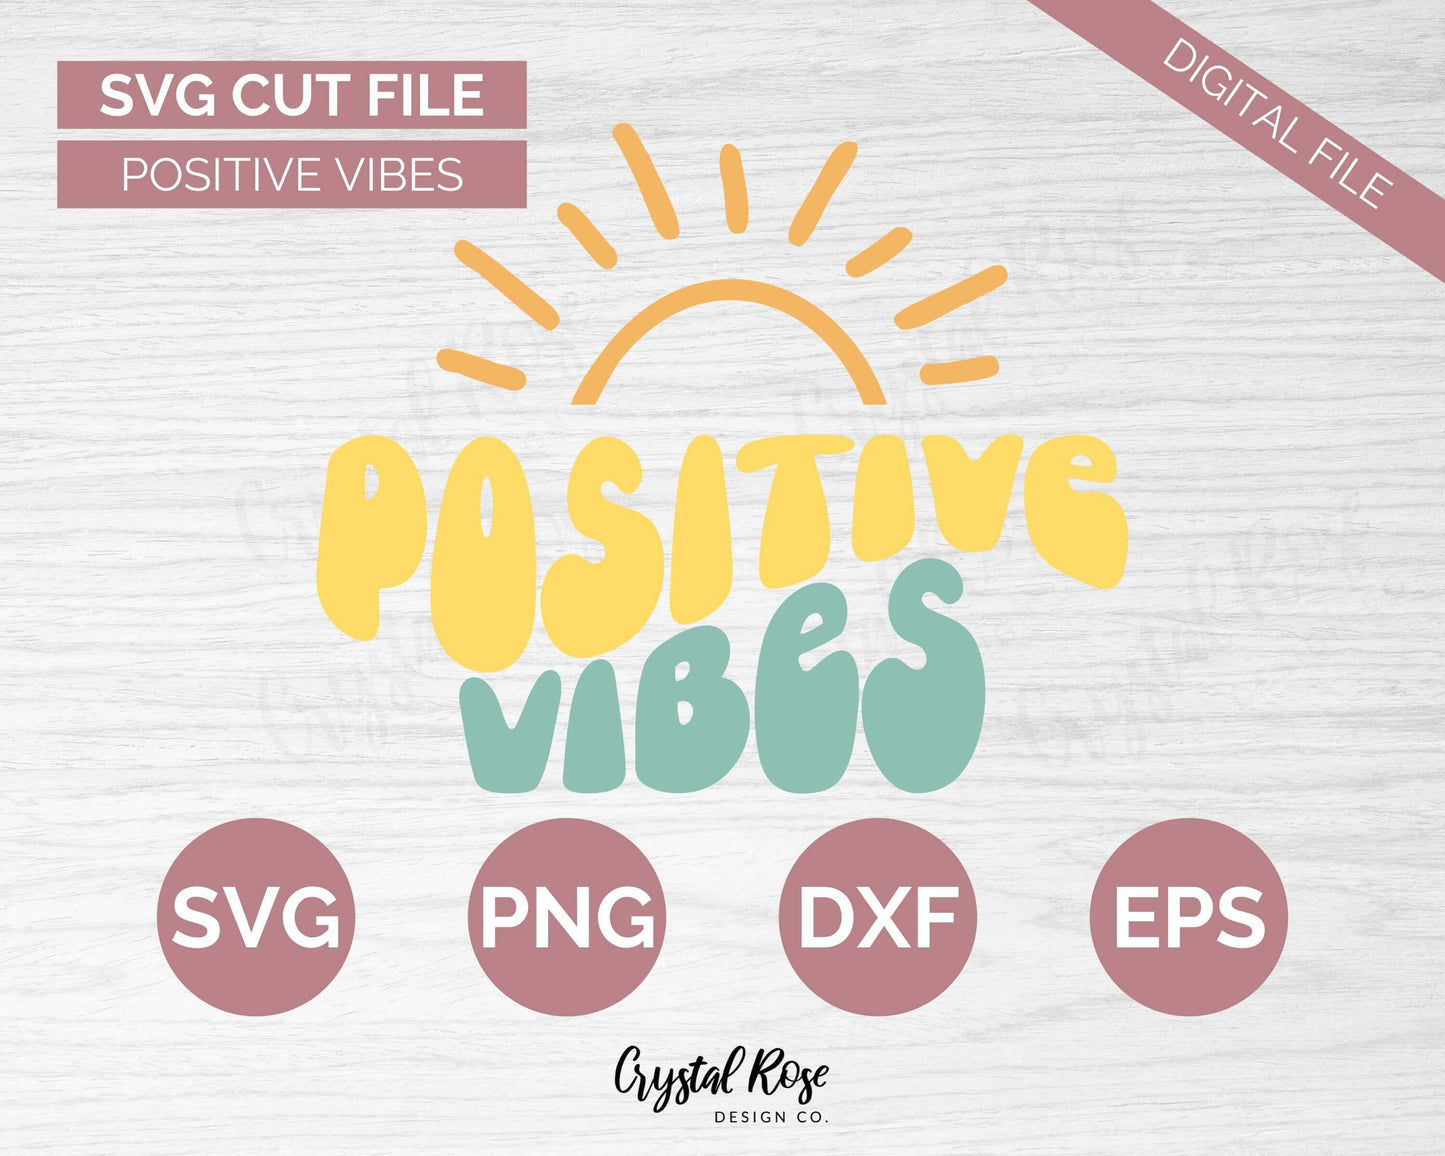 Retro Positive Vibes SVG, Inspirational SVG, Digital Download, Cricut, Silhouette, Glowforge (includes svg/png/dxf/eps)